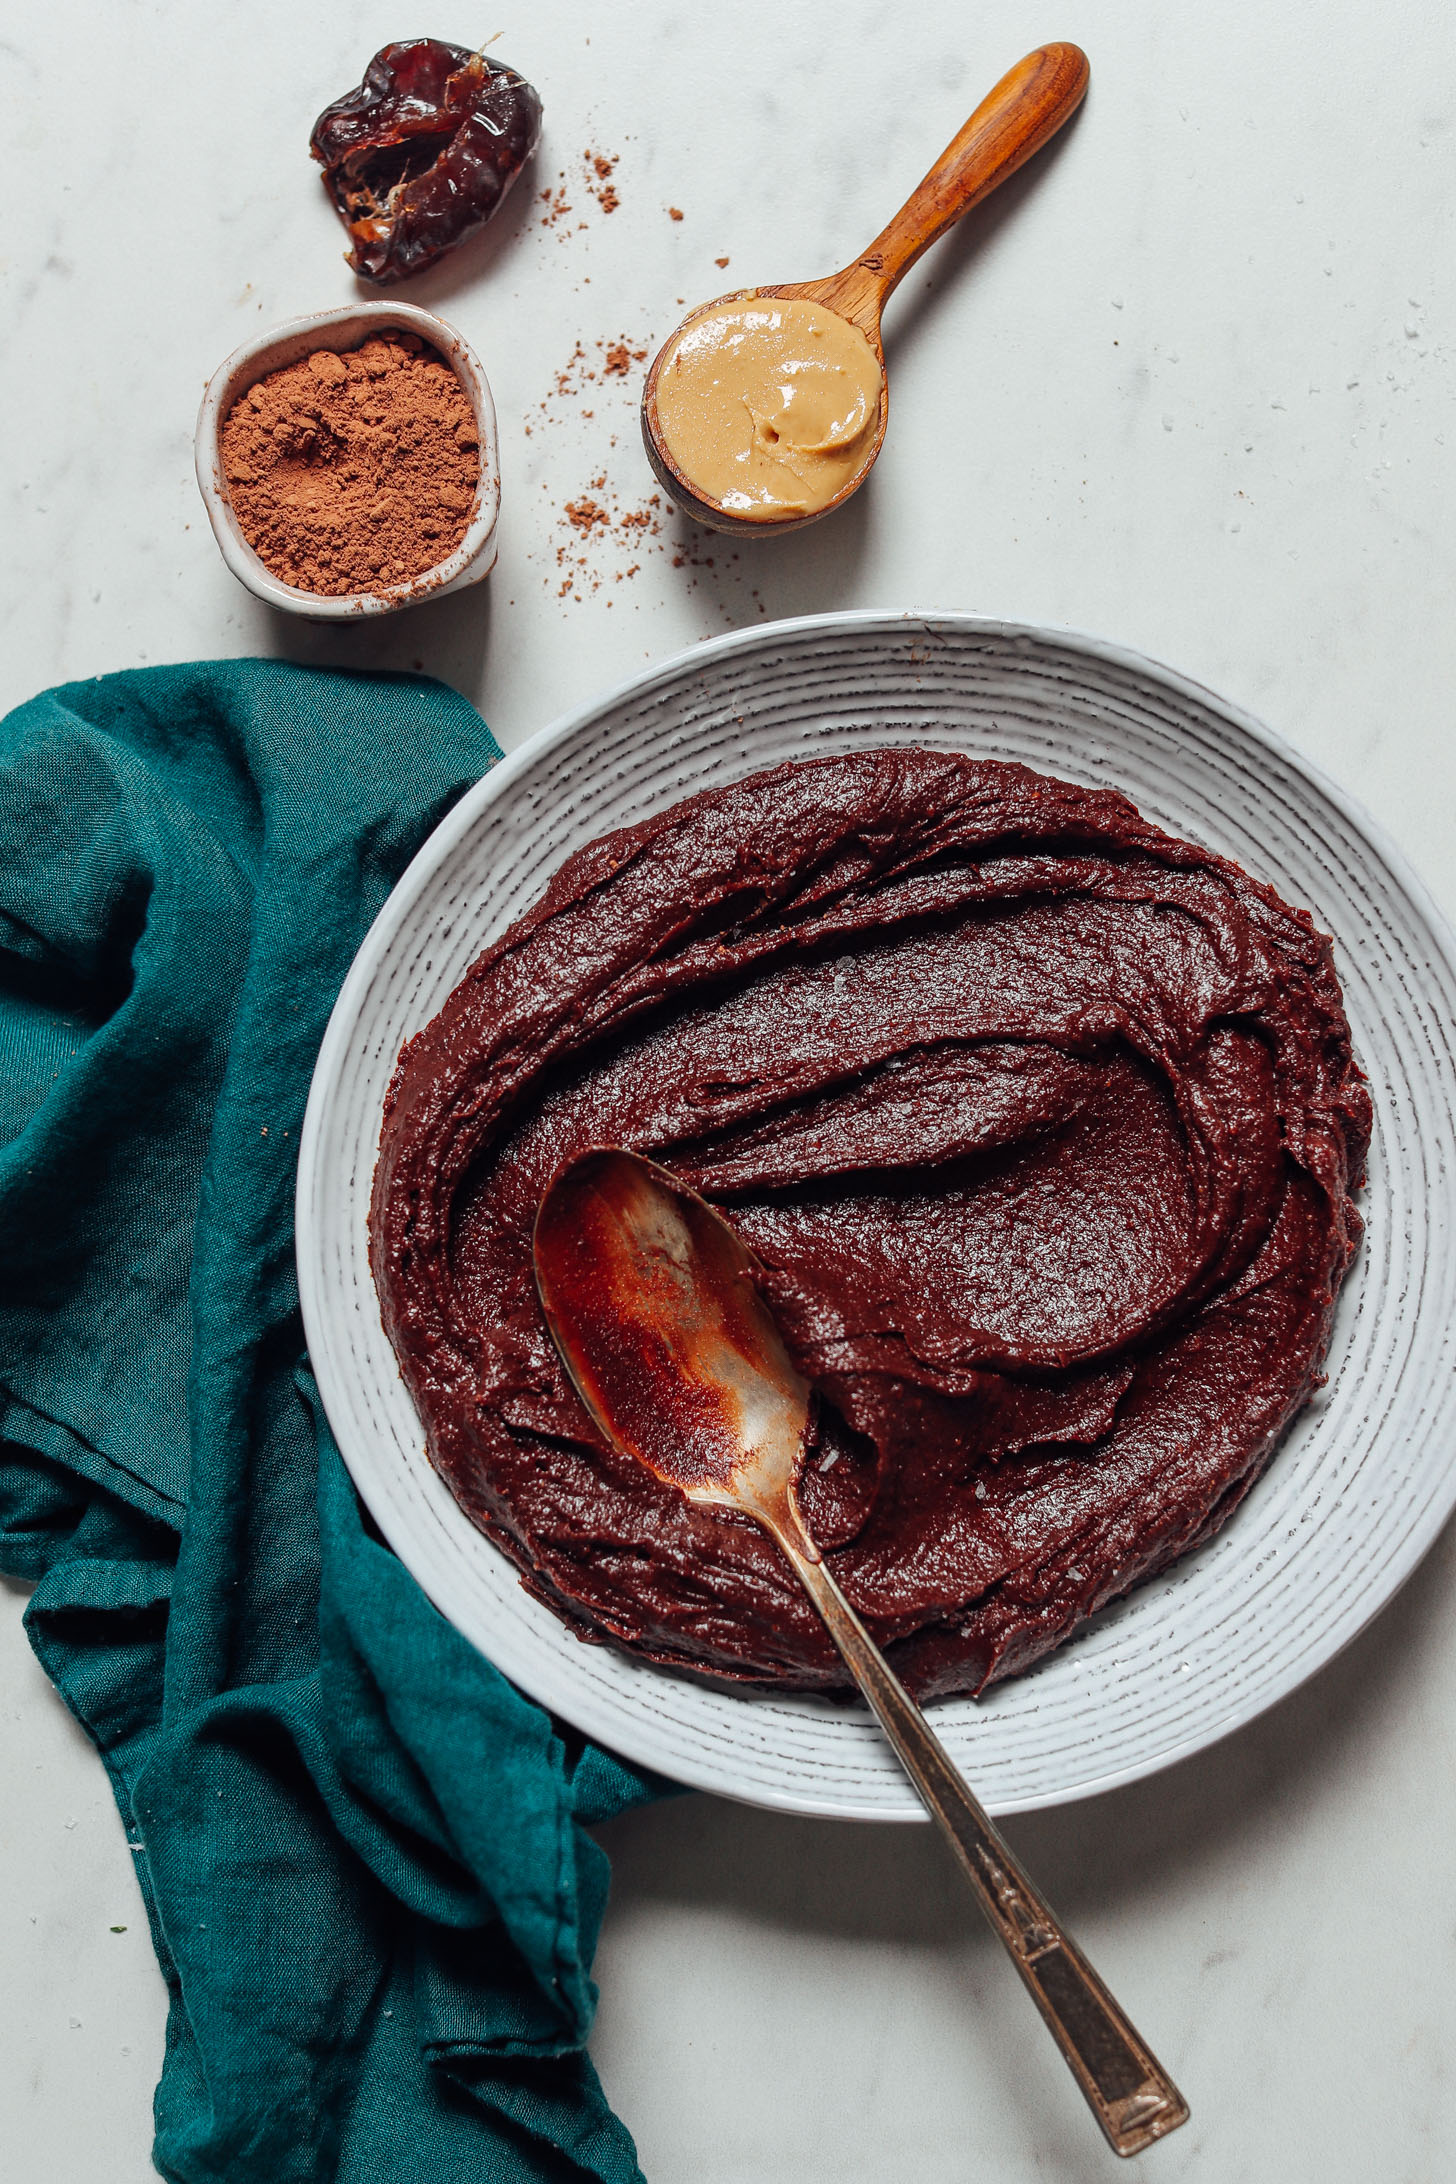 Spoon in a bowl of gluten-free Vegan Chocolate Frosting